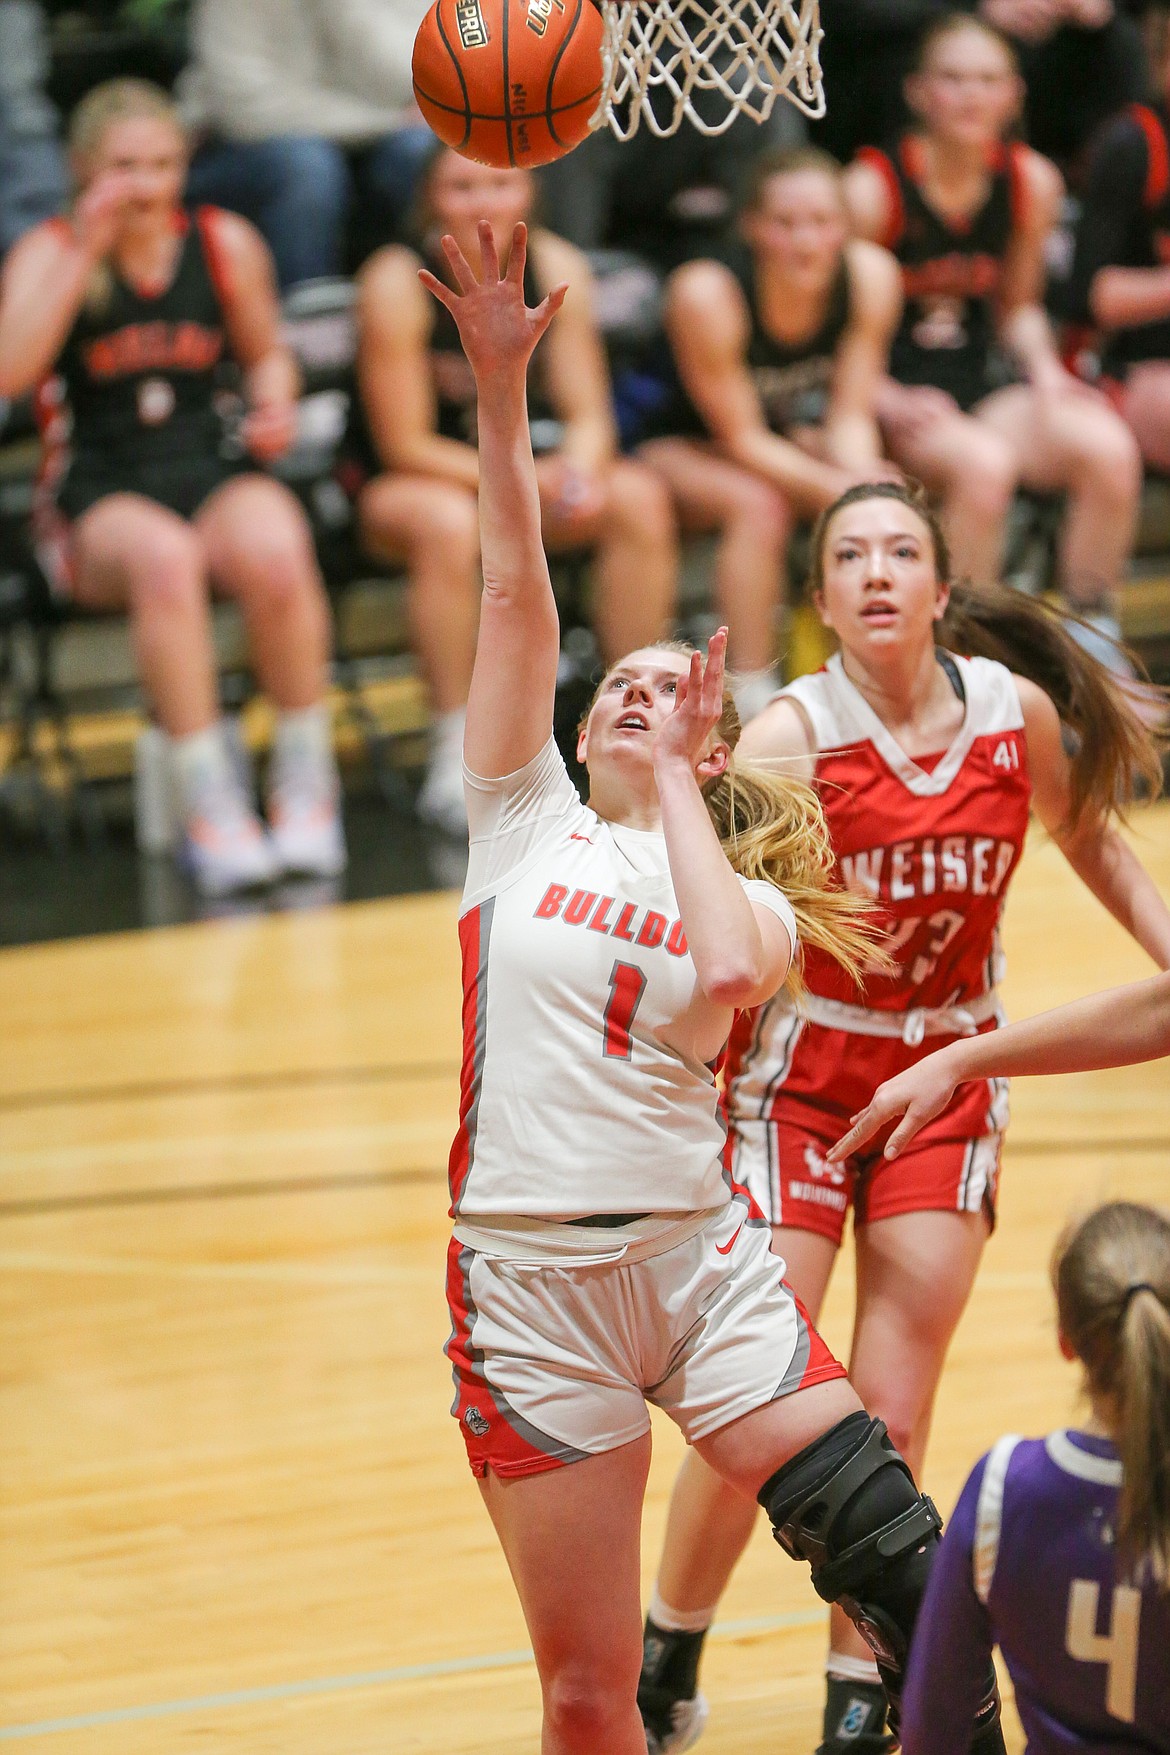 JASON DUCHOW PHOTOGRAPHY
Sandpoint High senior Kelsey Cessna puts up a shot during the first half for the Region team in the 20th annual girls Idaho High School All-Star Basketball Game at North Idaho College on Saturday.